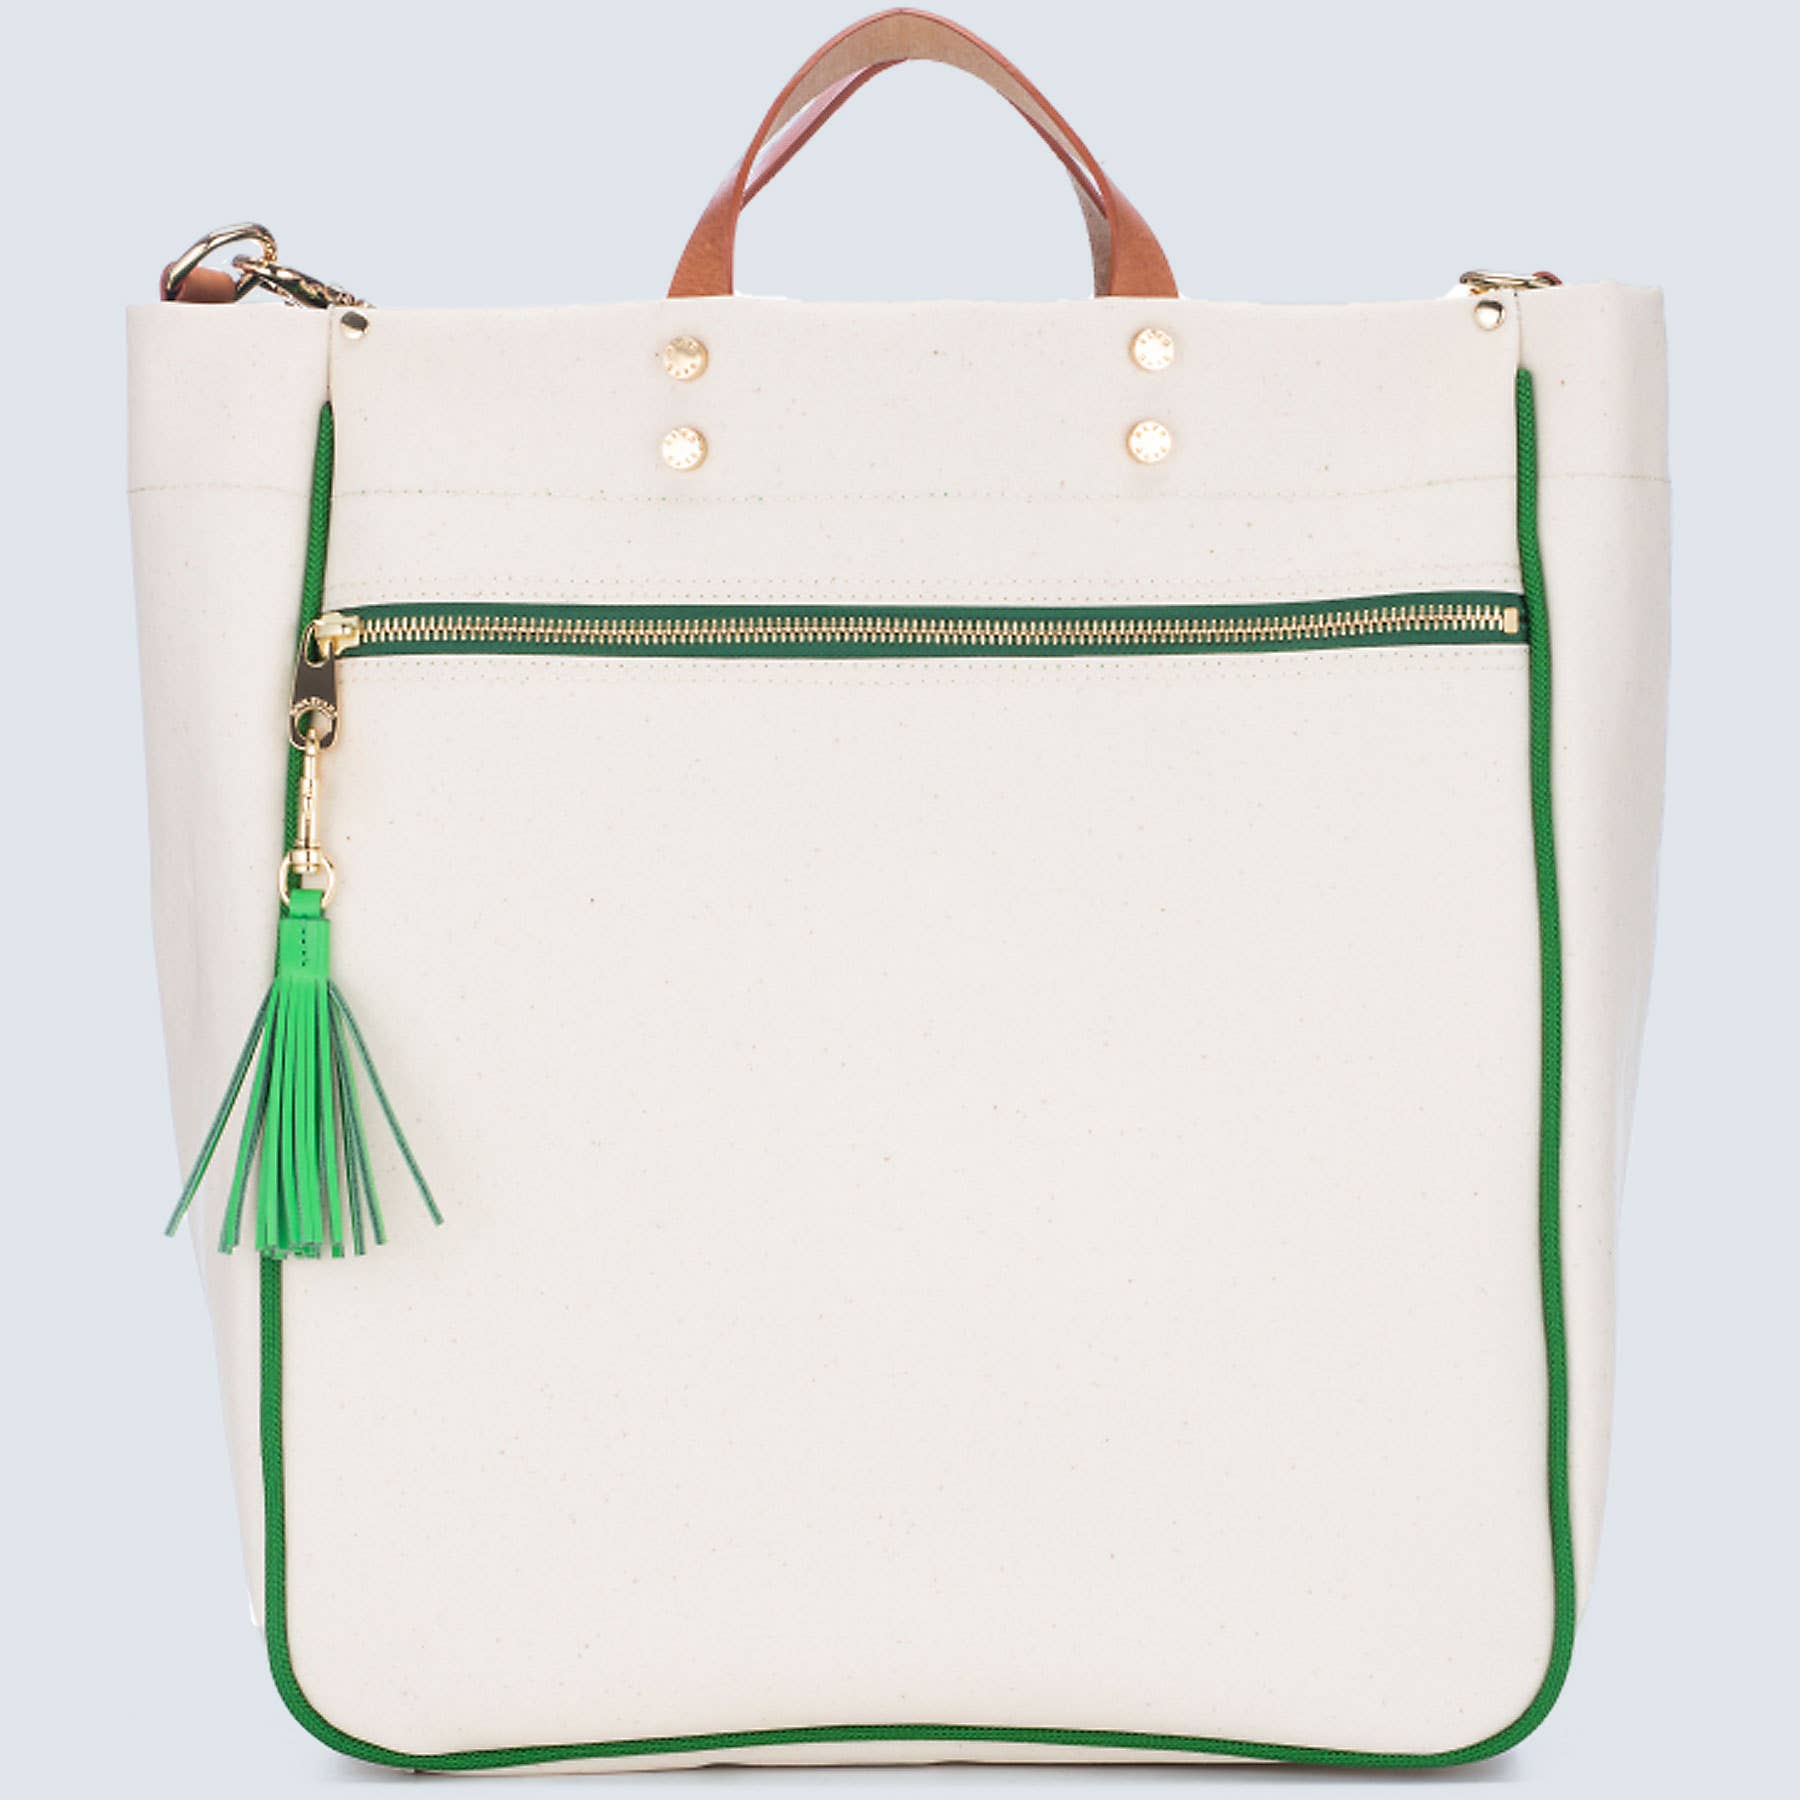 Parker Tote - Green